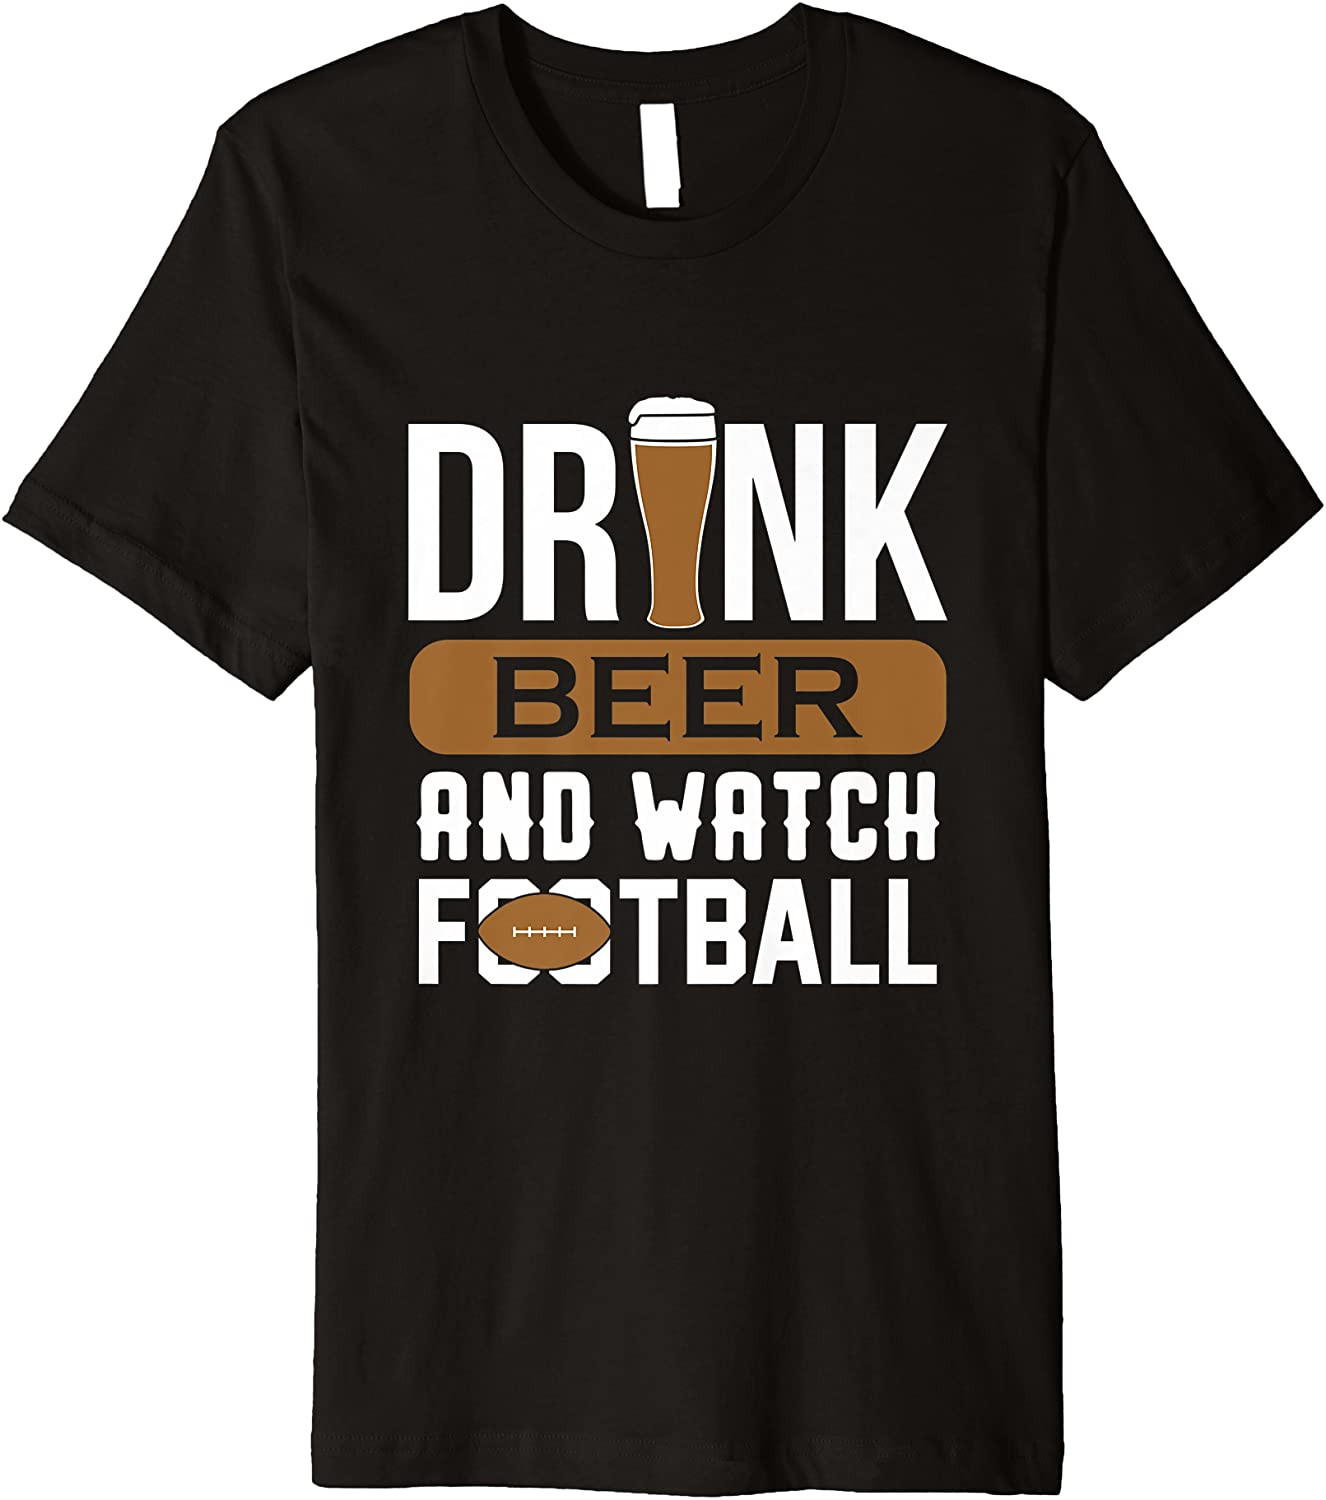 Drink Beer And Watch Football T T-Shirt